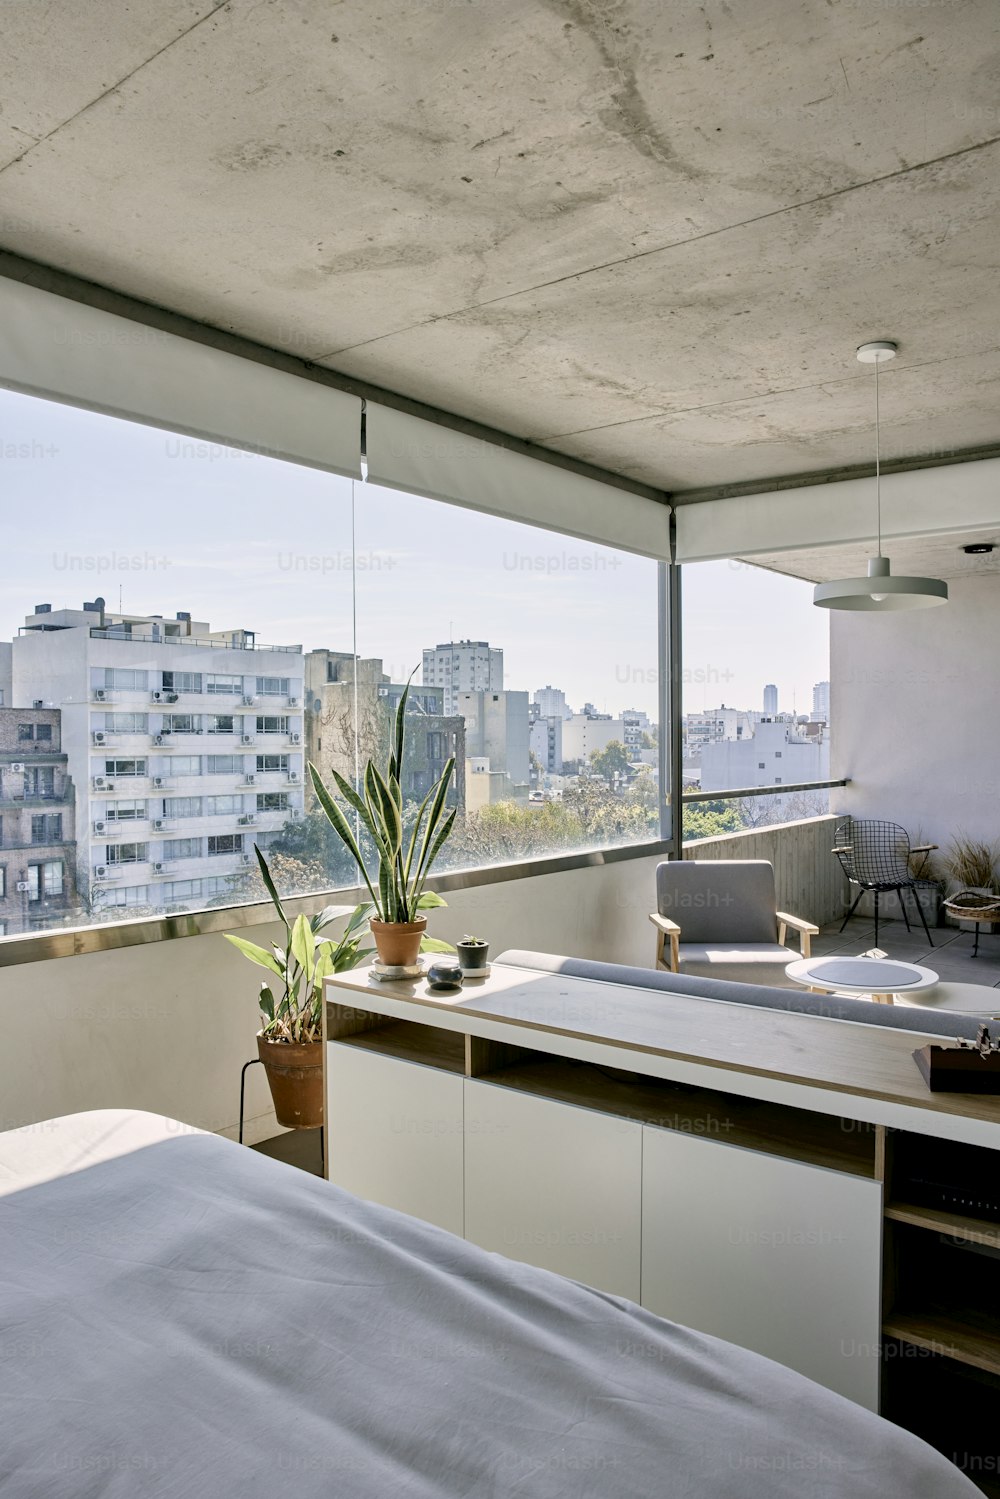 a bedroom with a view of the city